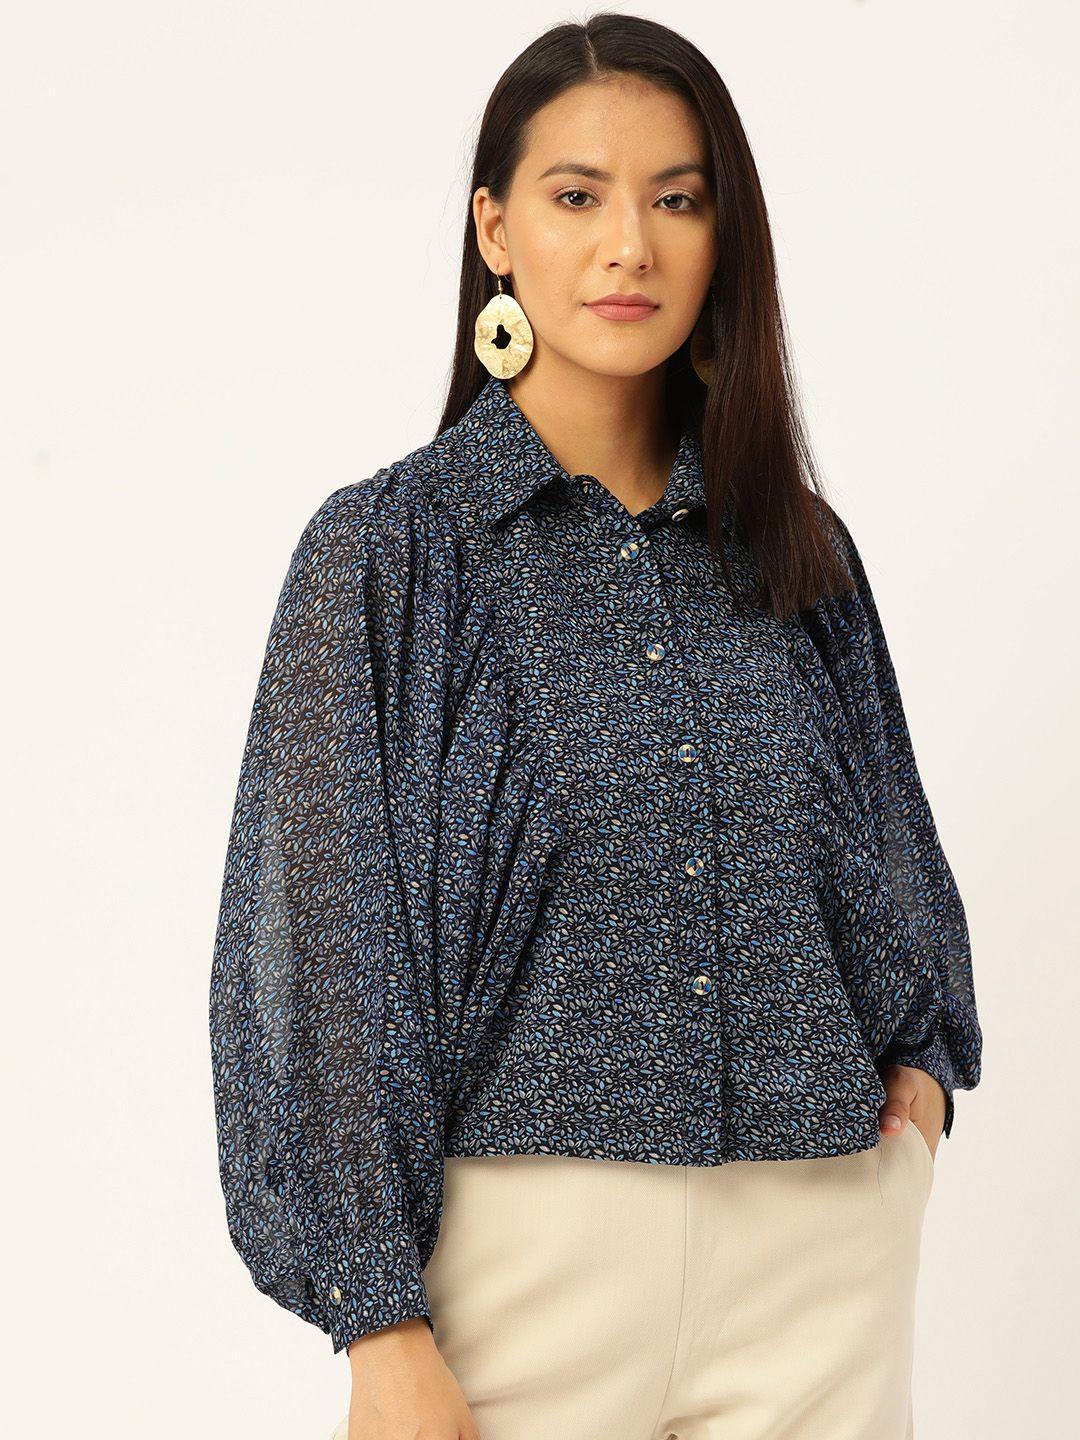 slenor floral print shirt style top